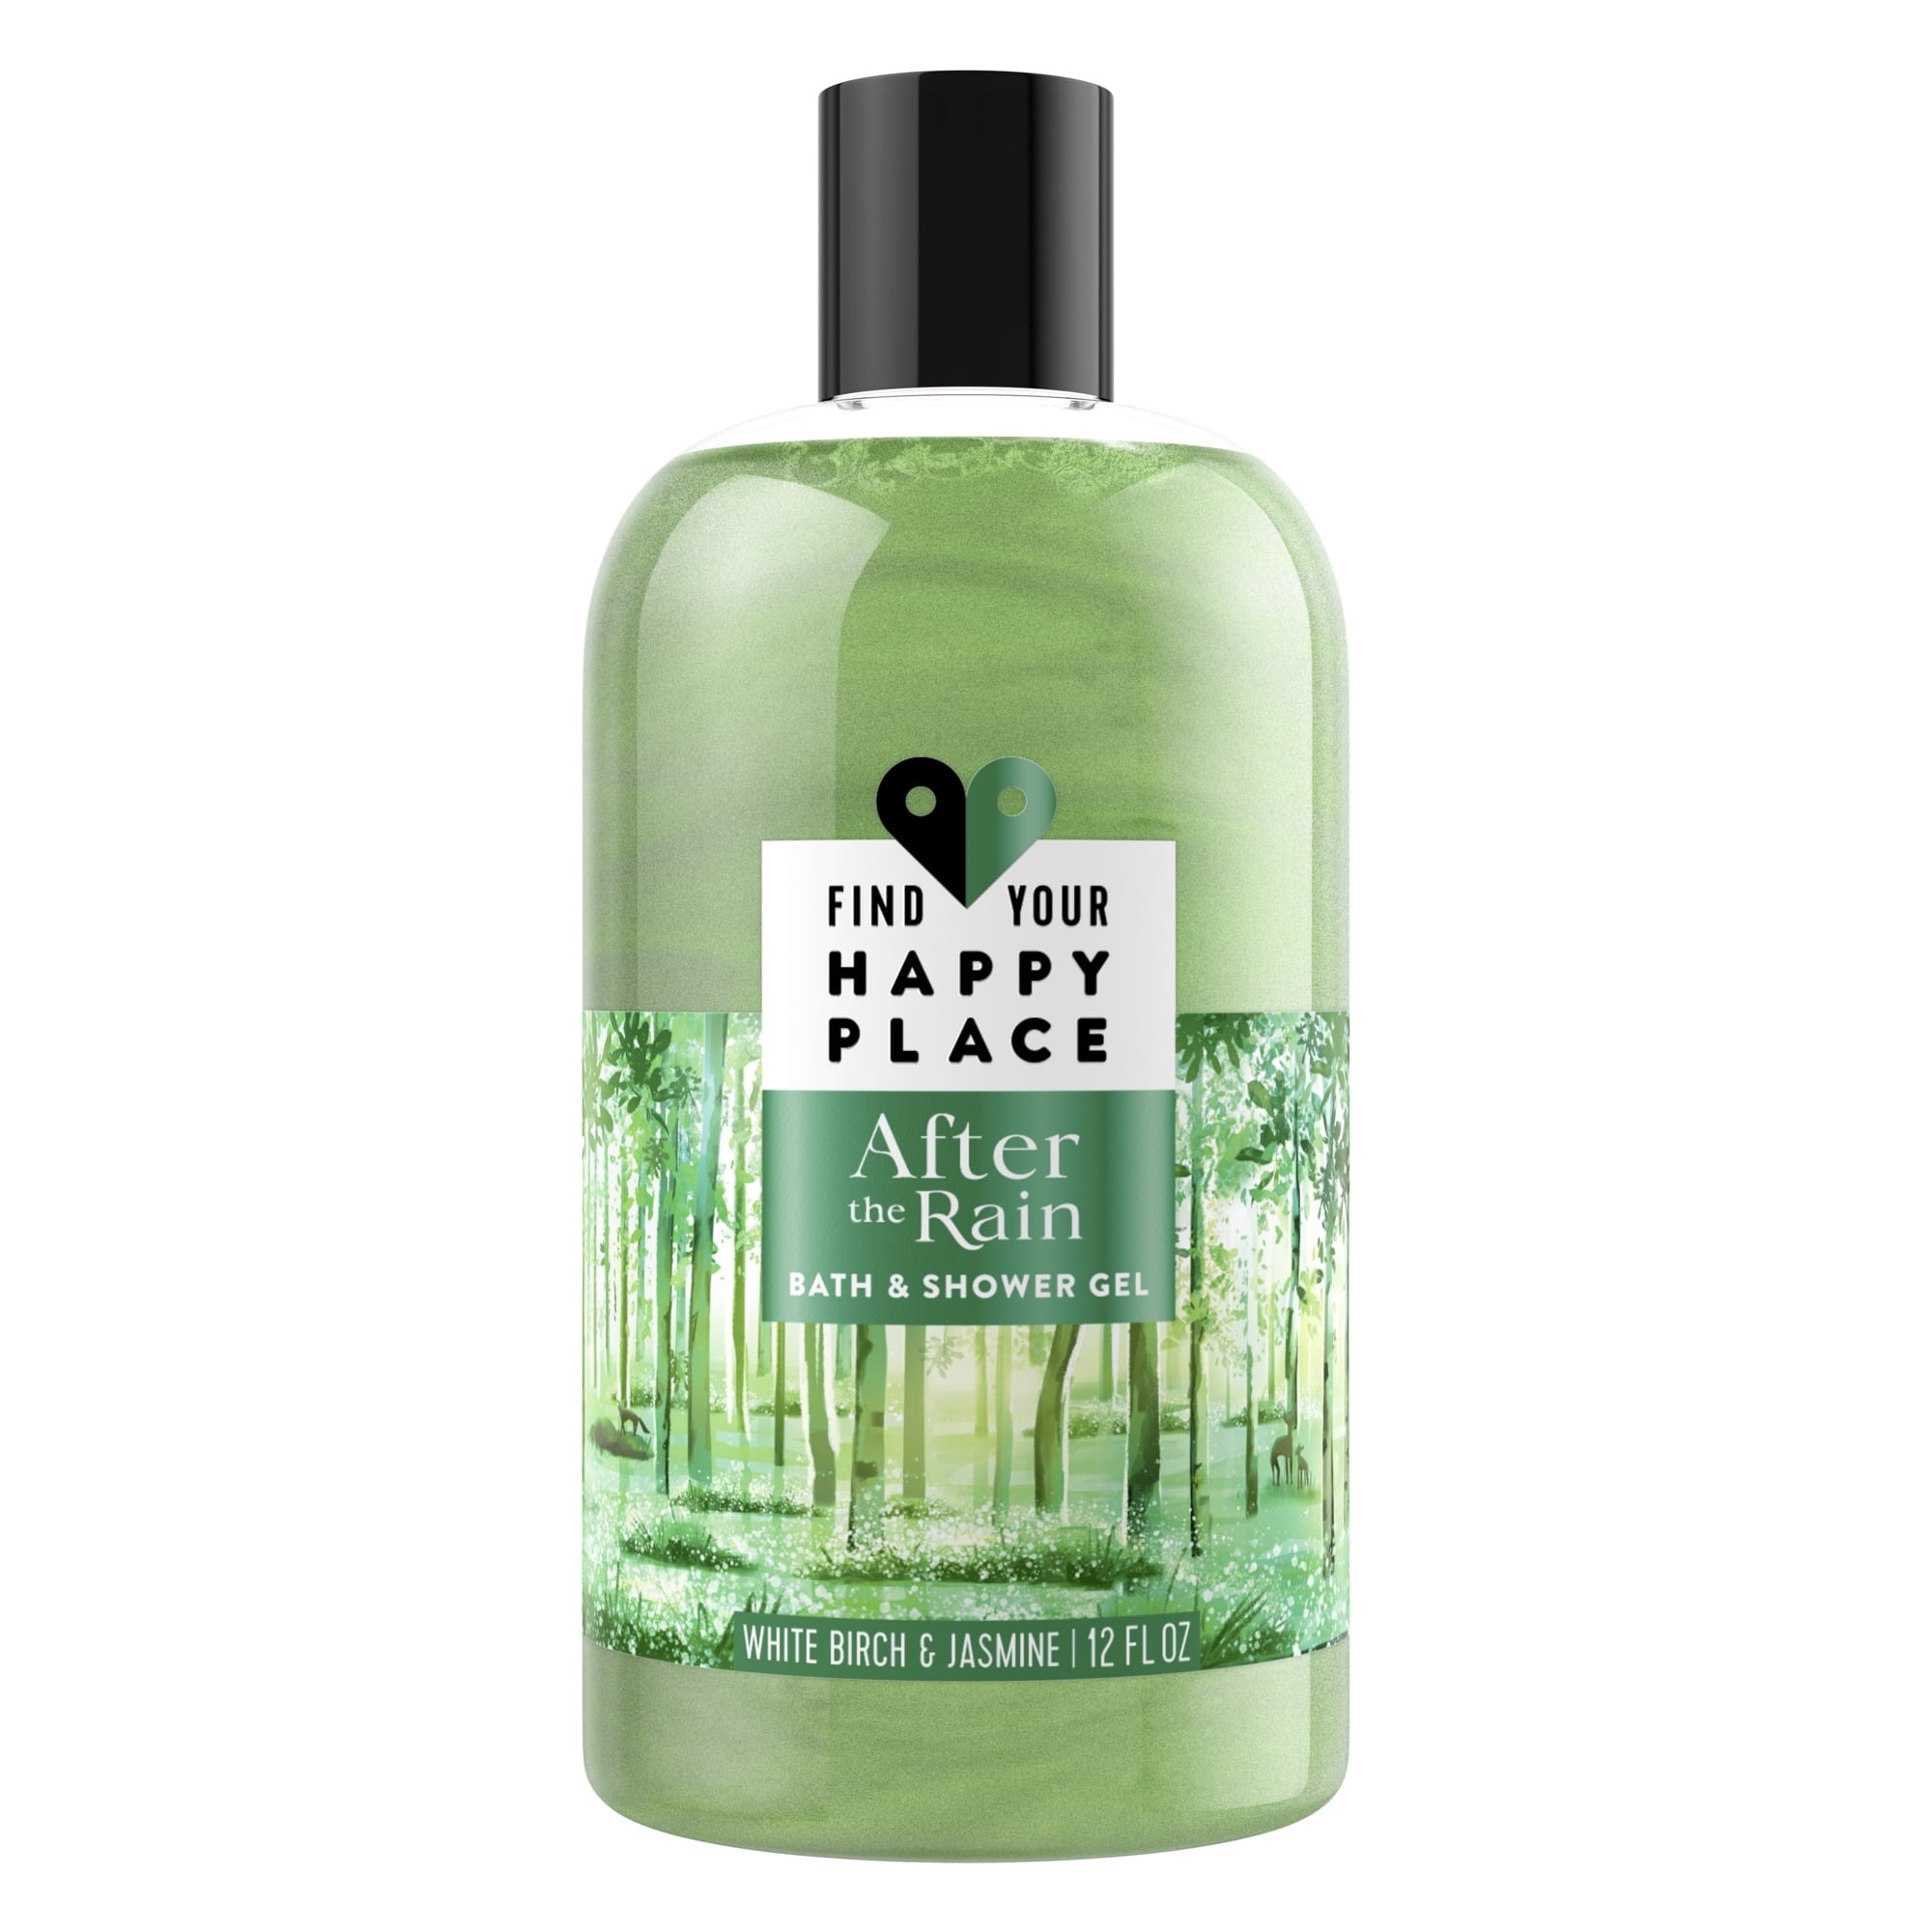 Find Your Happy Place After The Rain Bath and Shower Gel, 12 oz